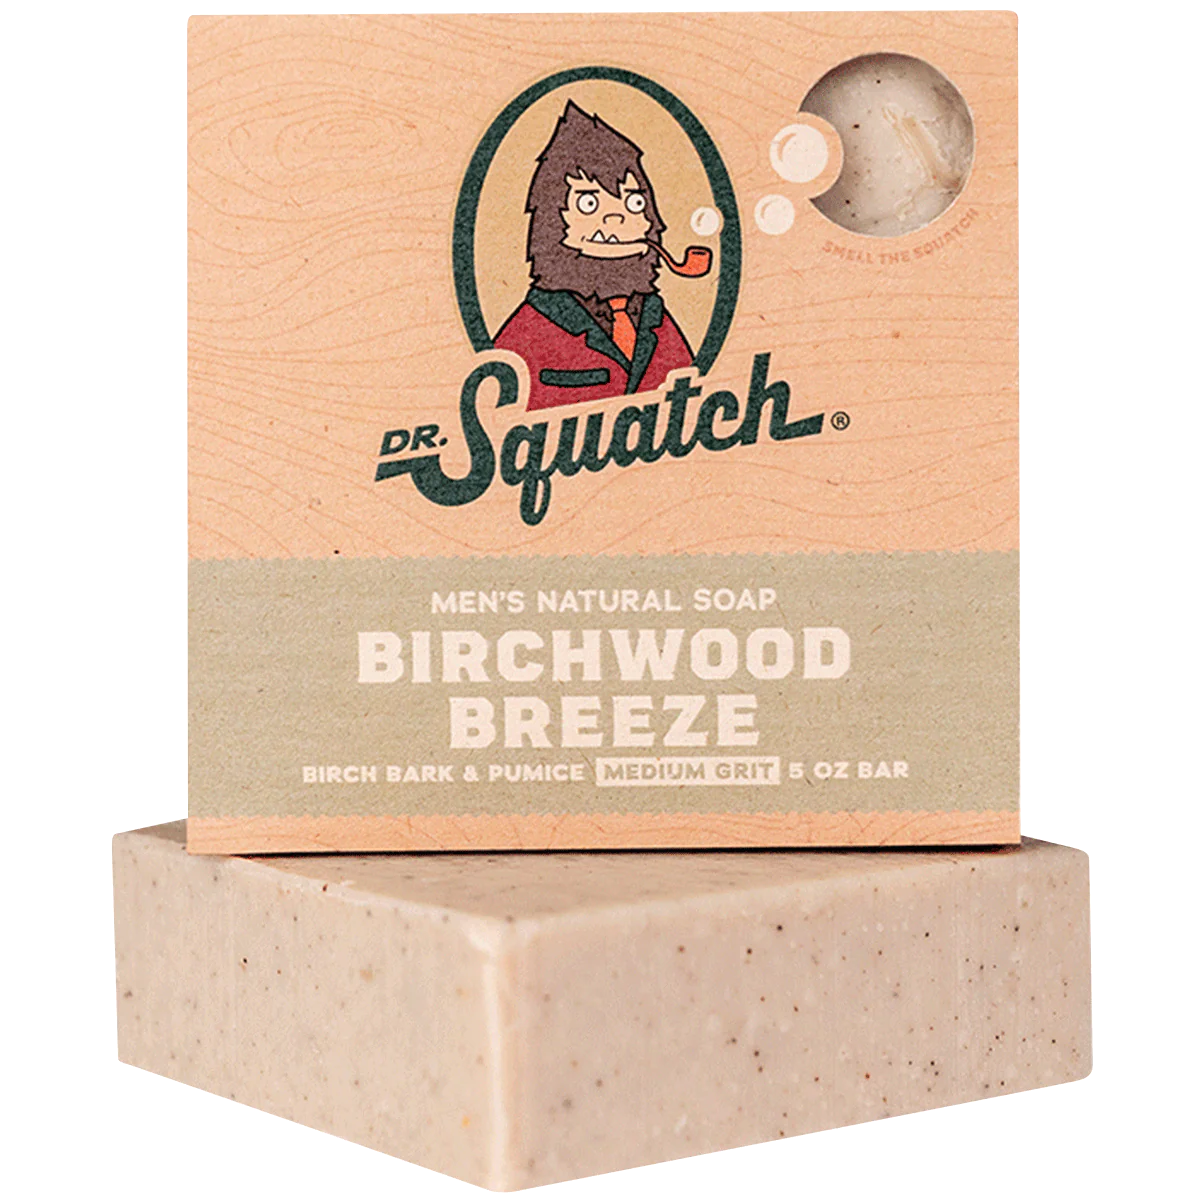 Dr. Squatch Limited Edition All Natural Bar Soap for Men with Medium Grit  Snowy Pine Tar